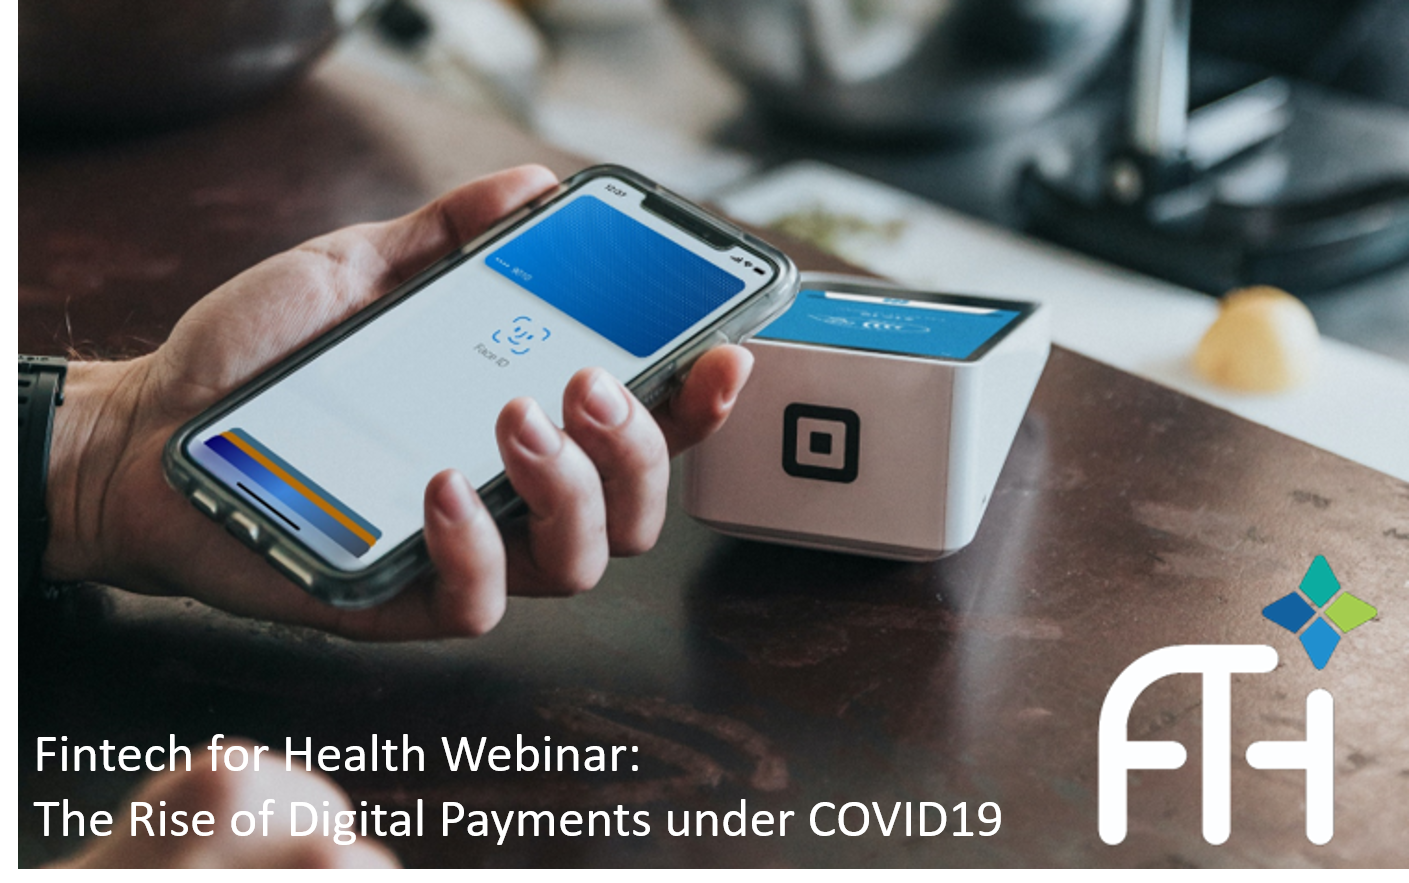 Fintech for Health Webinar The Rise of Digital Payments under COVID19